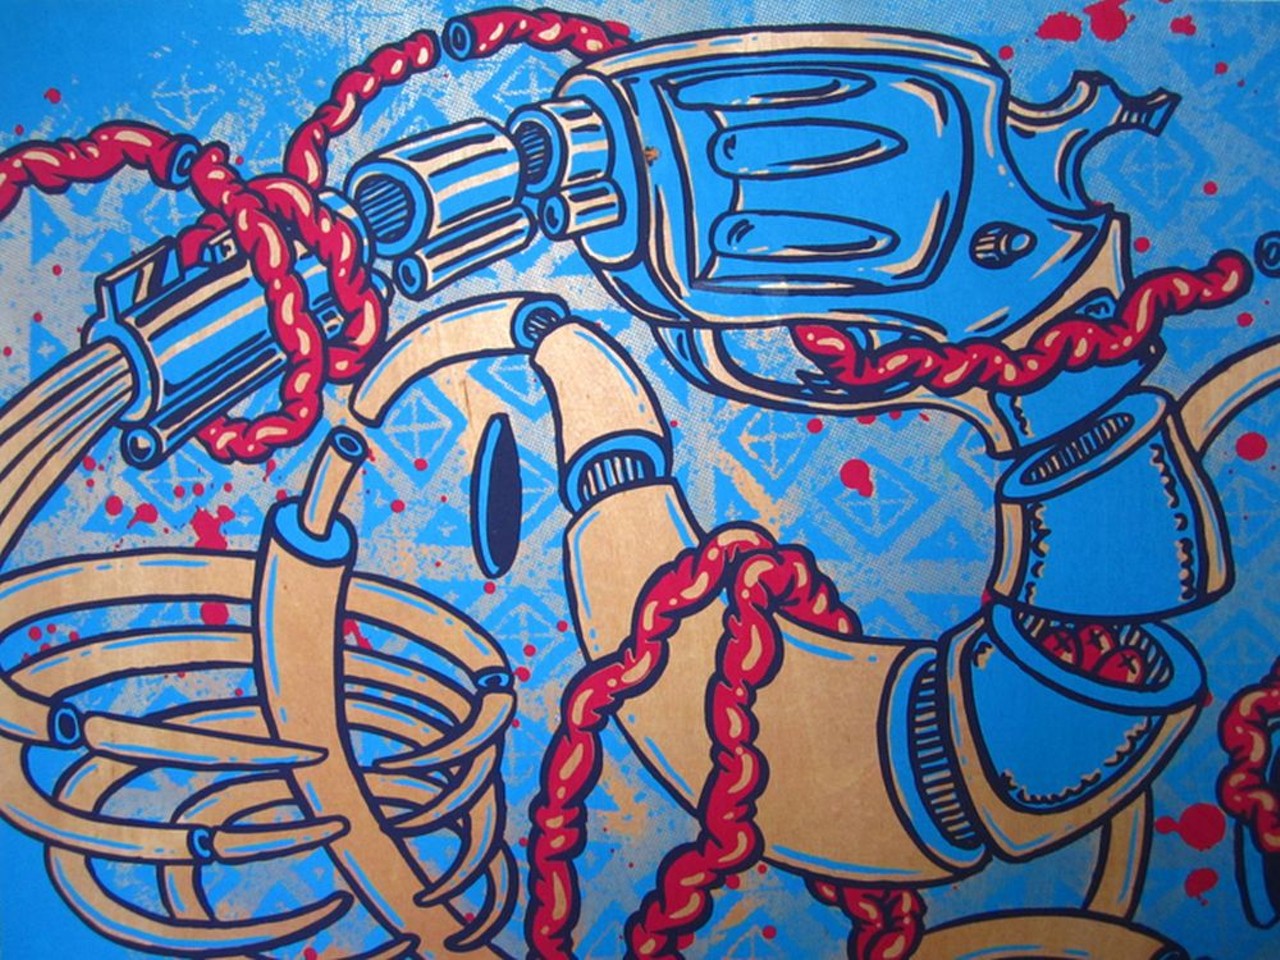 Technology and the Immortal Condition: The Work of Nicholas R. Wilson
The Gallery at the Village
Theater at Cherry Hill
Sept. 3-29
Originally from Trenton, mixed-media artist Nicholas R. Wilson studied fine art and graphic design and now produces unusual, cartoonish but edgy works using a mixture of painting and screen printing on wood box panels. We don’t know much more than that about Wilson, other than his work pretty much leaps out at you and grabs you by the collar. The artist himself says, “Words may not perfectly communicate what we want to say to each other.  As music communicates a feeling through sound, art communicates through sight, and the two composed together is what drives my work.” Drop in for a look 10 a.m.-2 p.m. weekdays or during public performances at the theater. The Village Theater at Cherry Hill is at 50400 Cherry Hill Rd., Canton; 734-394-5300; cantonvillagetheater.org. To view more of Wilson’s works, see http://nwilsonphoto.tumblr.com/